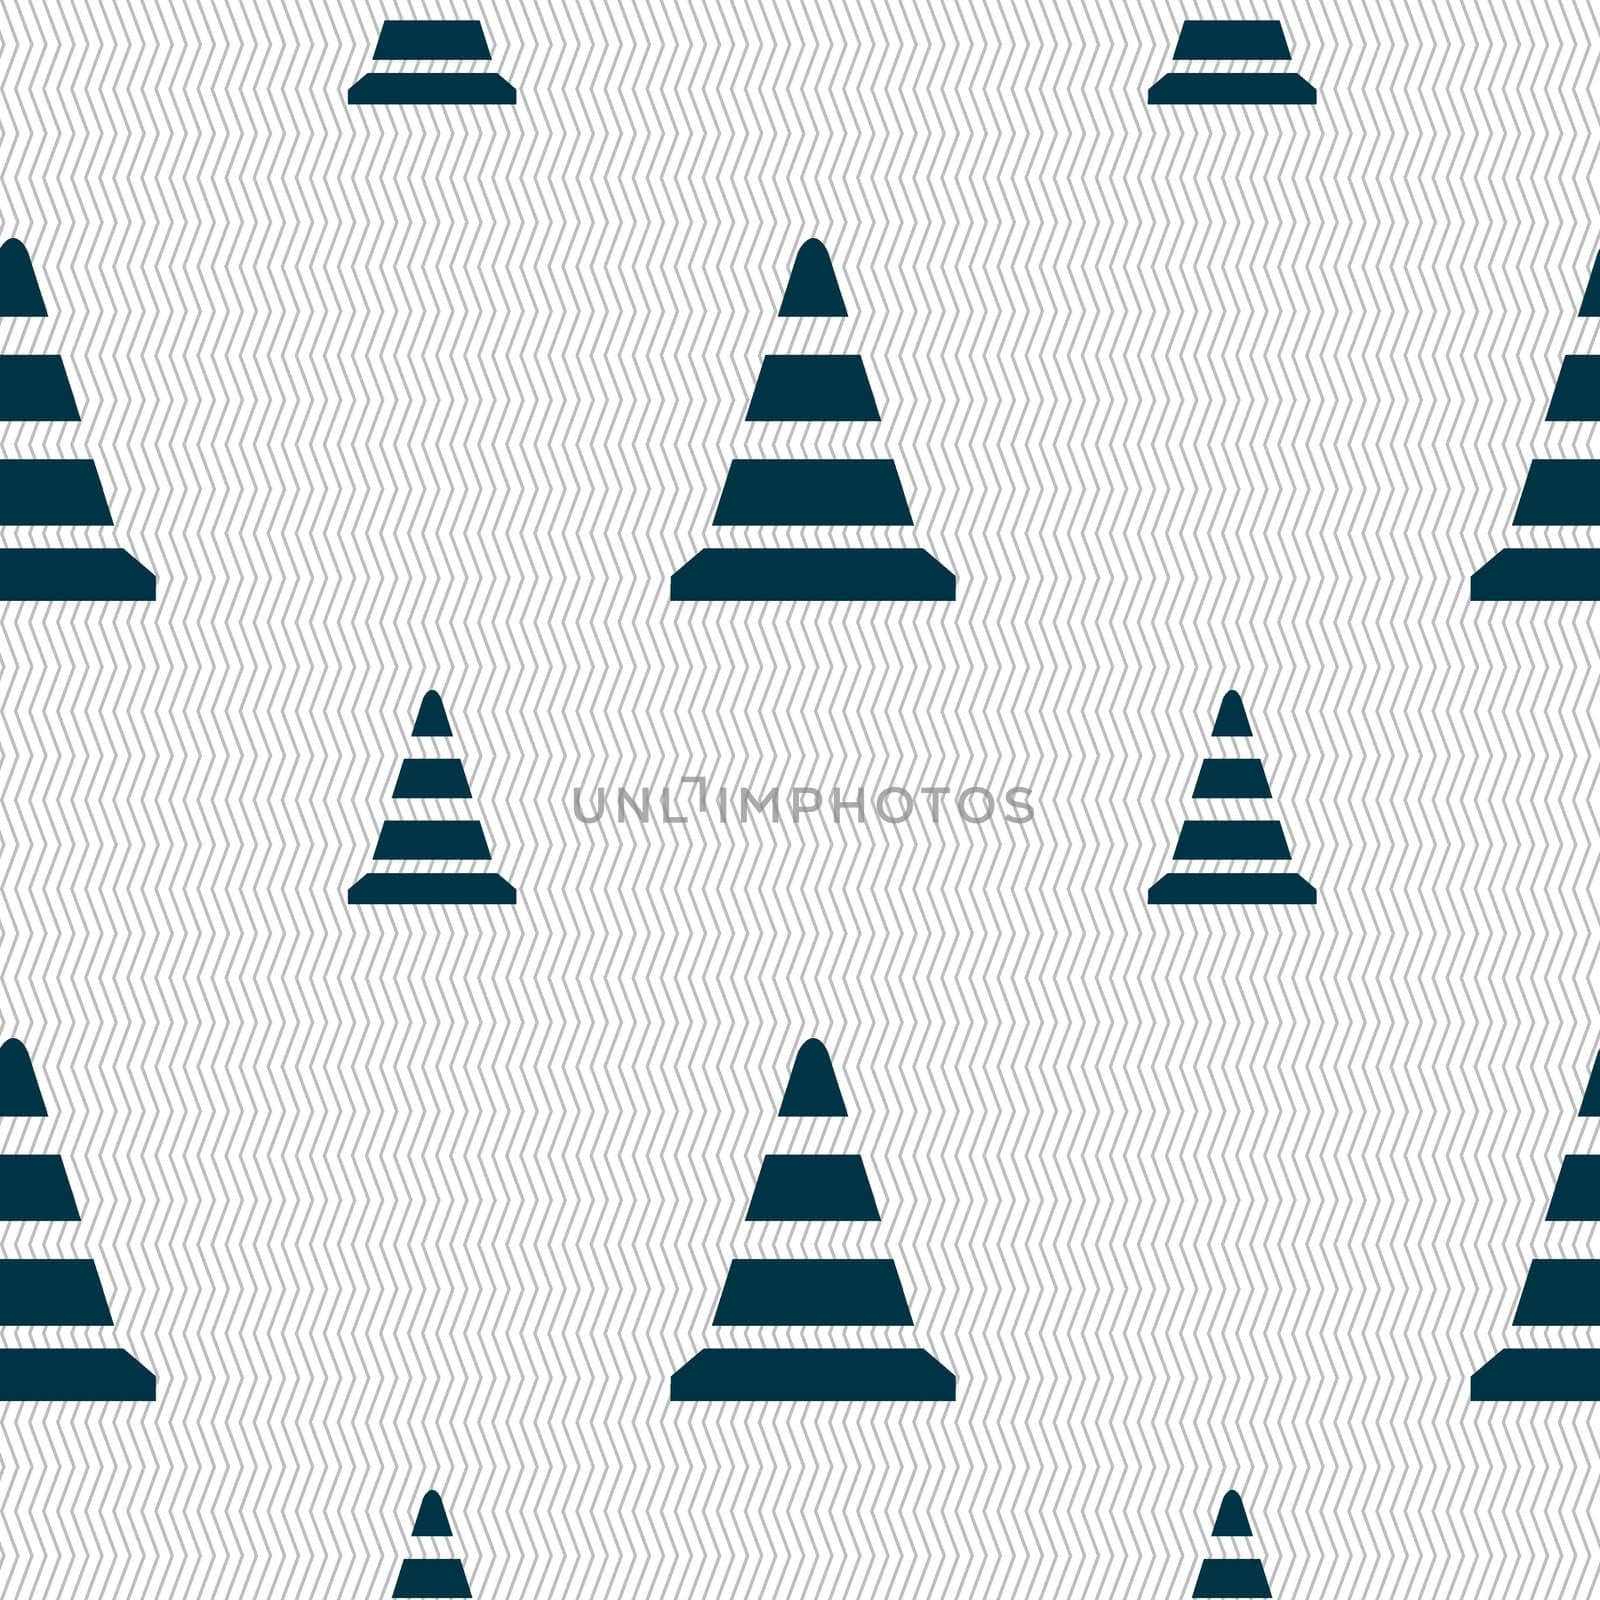 road cone icon. Seamless pattern with geometric texture. illustration